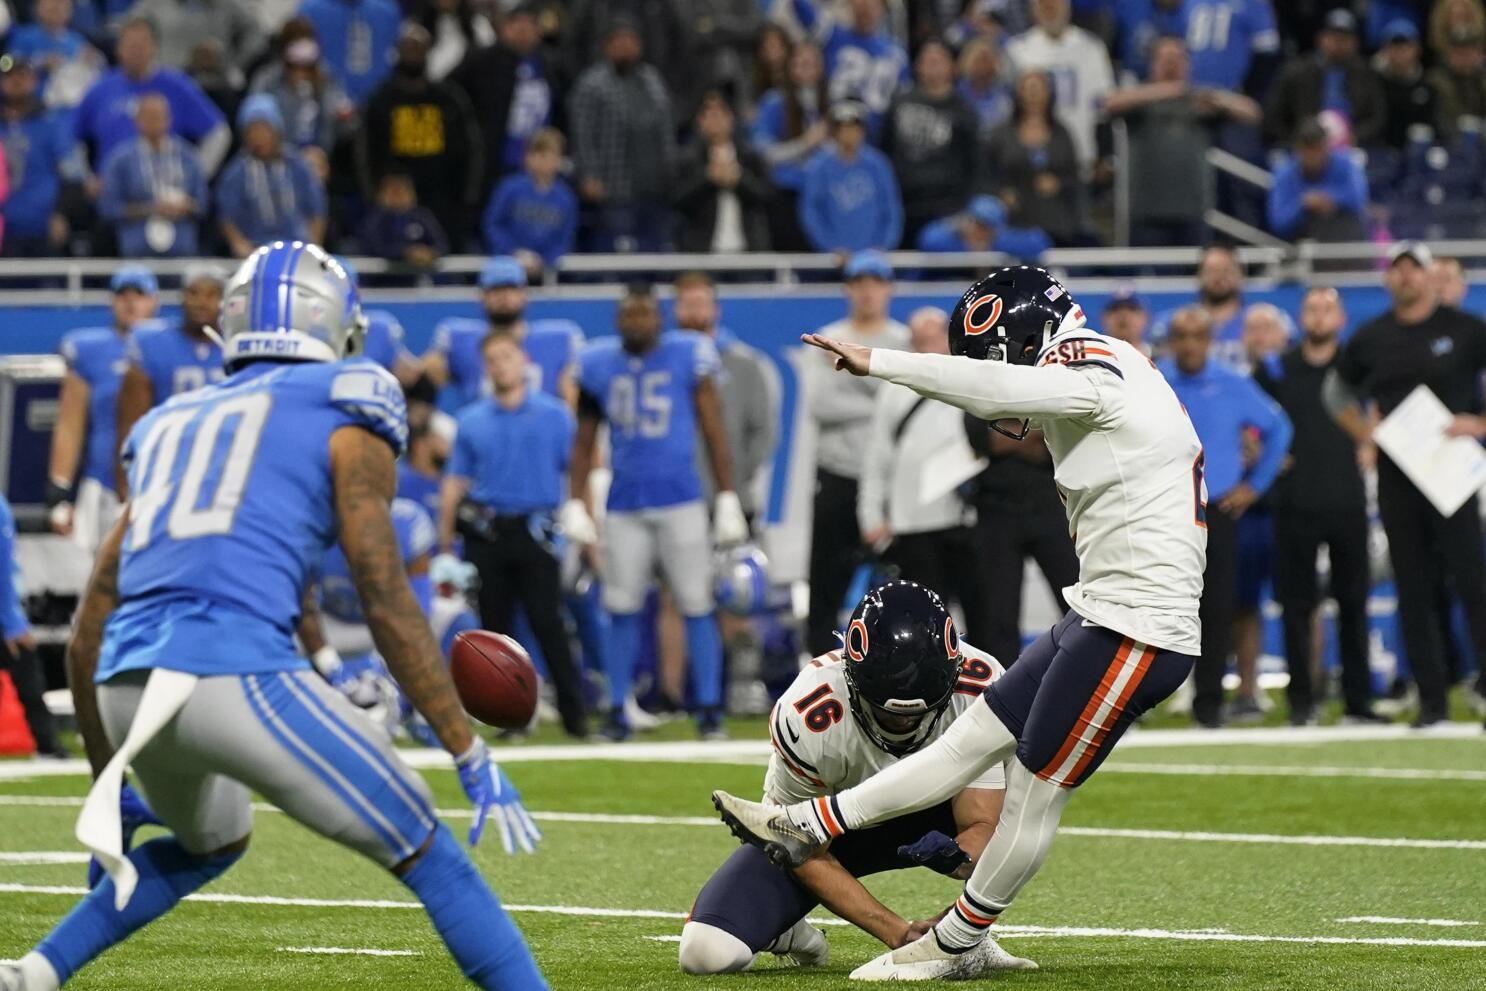 How to Watch Lions vs Bears on Thursday, November 25, 2021